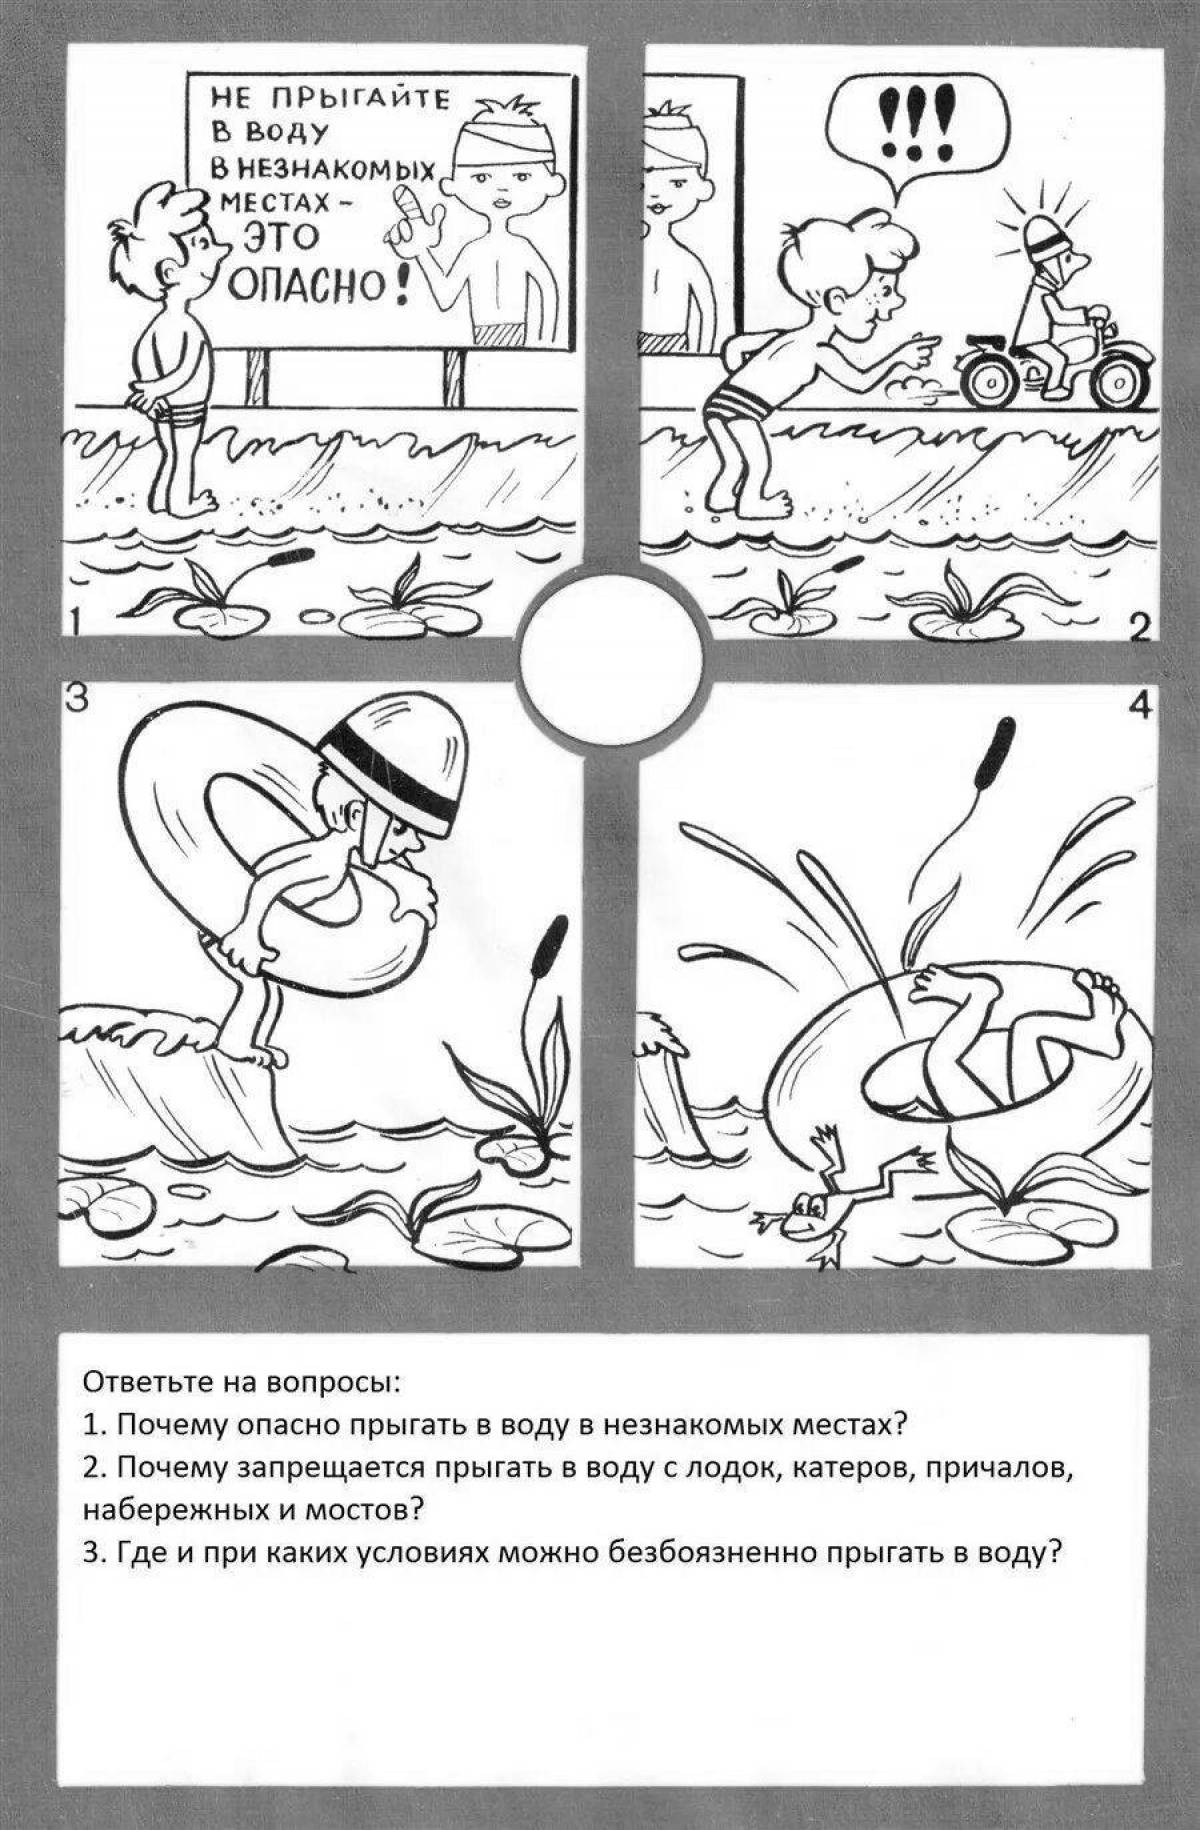 Water Safety Information Coloring Page